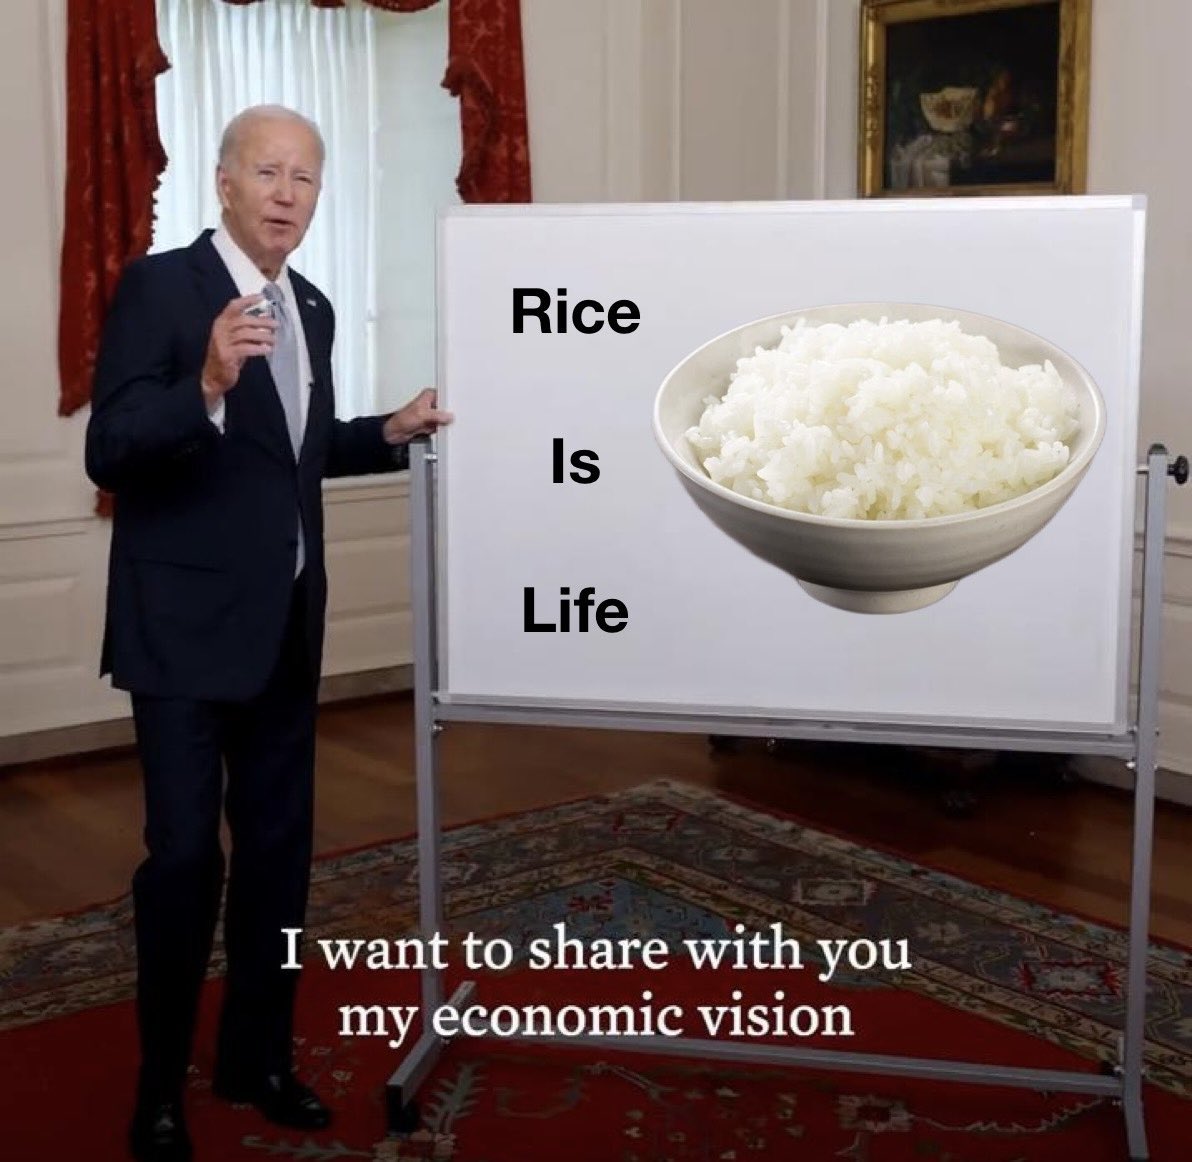 I am only a 2 day old $RICE Cooker and can’t vote but this sounds good to me.. $RICE $RICE Baby